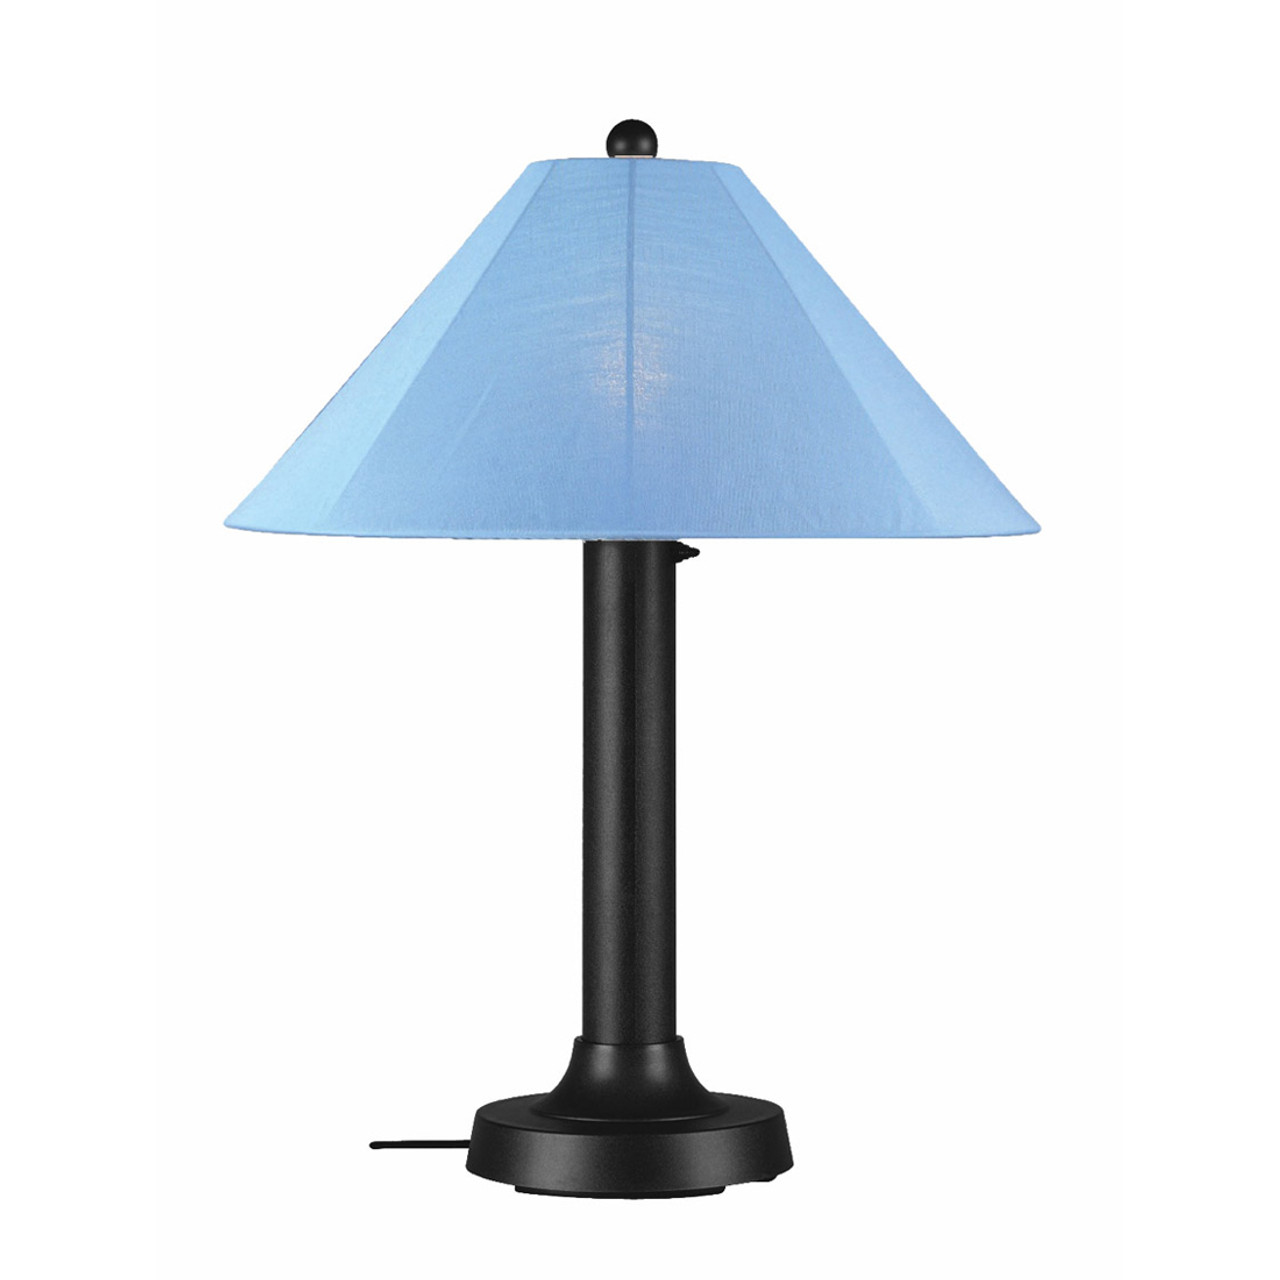 Patio Living Concepts 39-640 Catalina Table Lamp 39640 with 3" black body and sky blue Sunbrella shade fabric